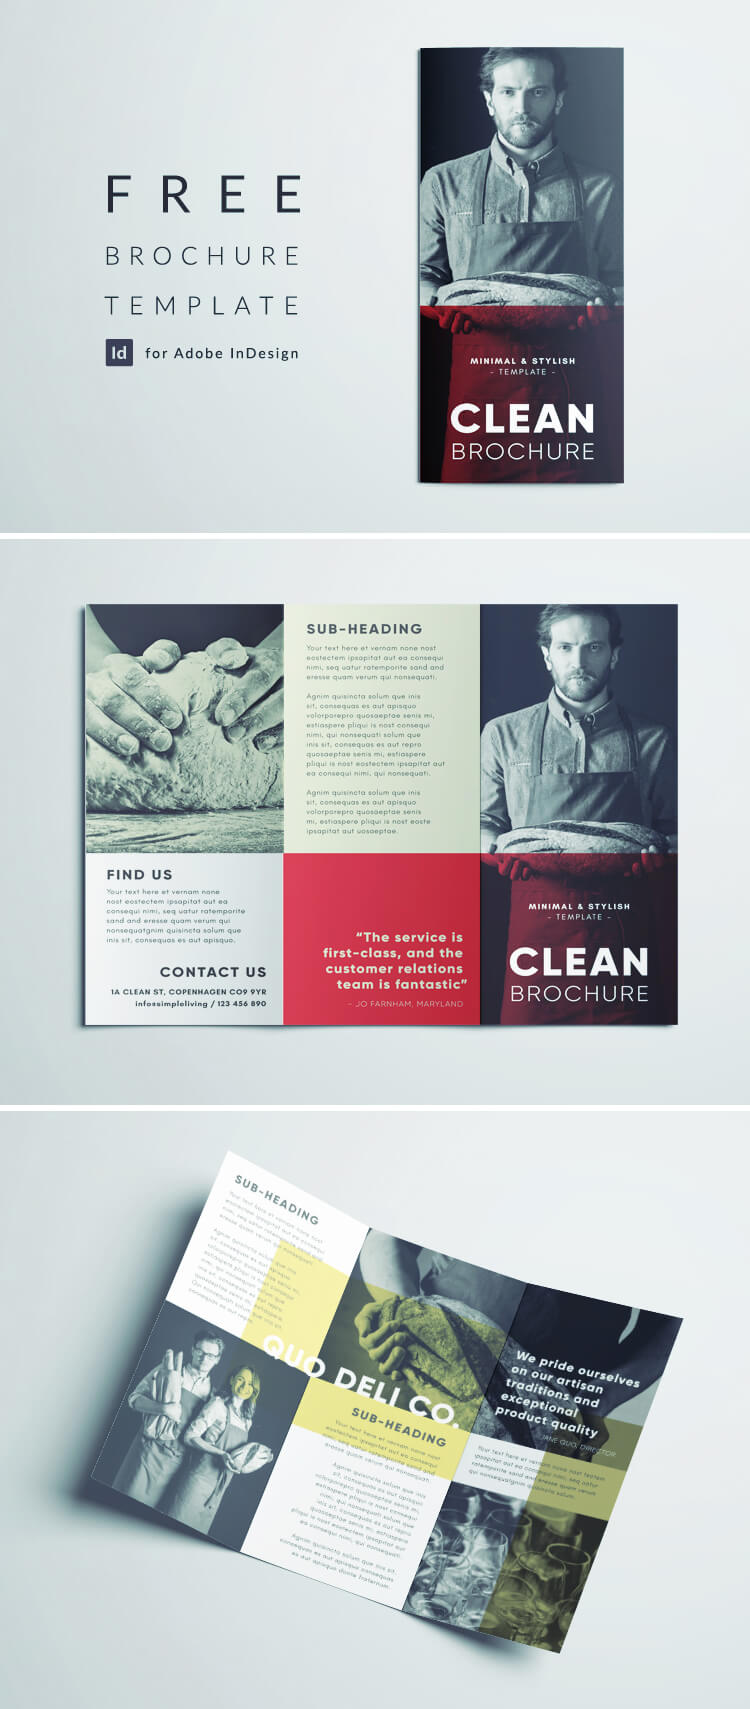 Clean Brochure Tempalte - Free InDesign Clean Brochure Template with Minimal Black and White Photography - Red and Yellow